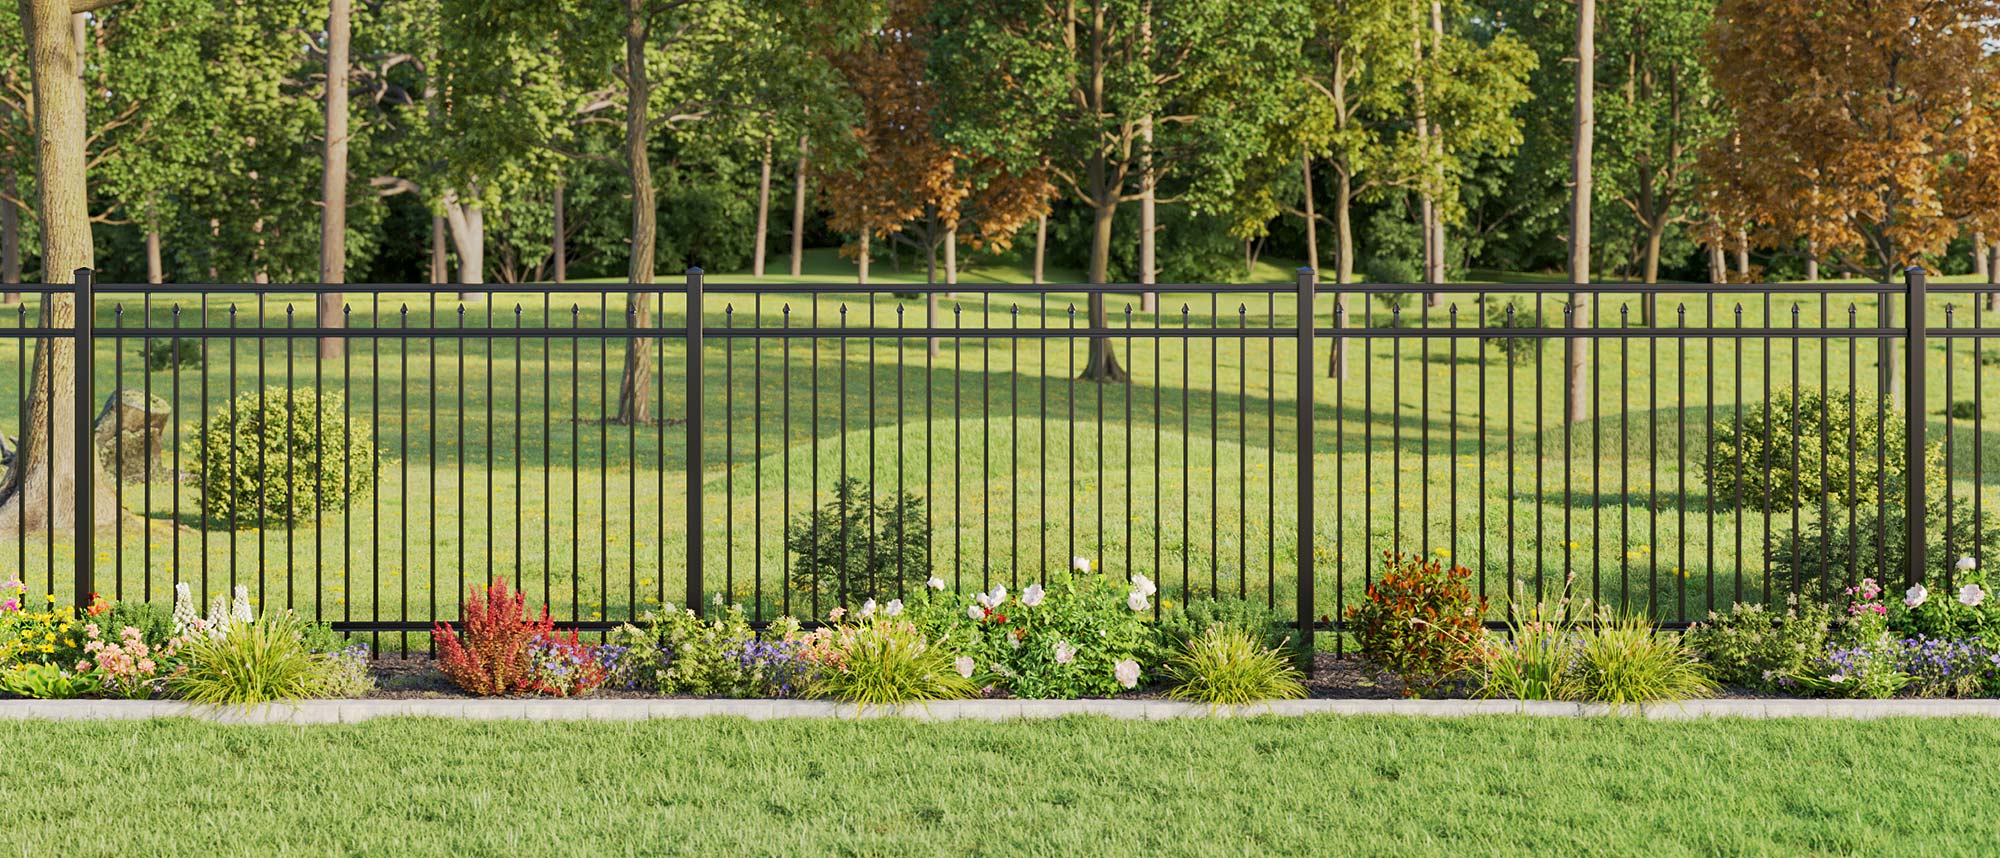 Evansville Indiana Aluminum Security Fence - Amethyst Style